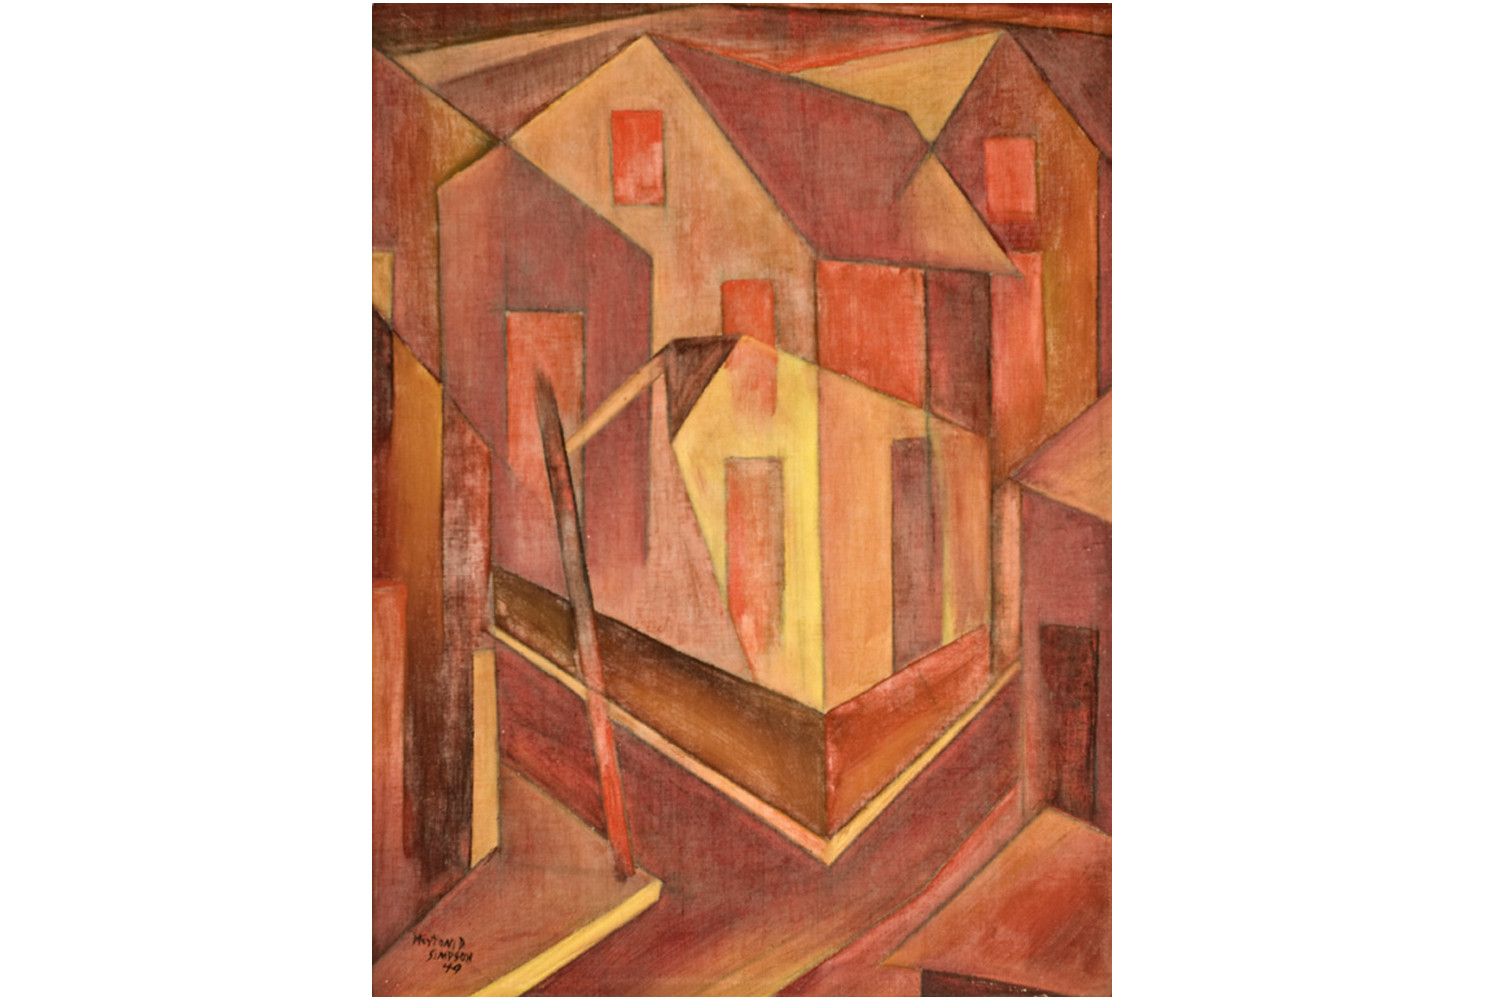 Untitled, 1949, by Merton D. Simpson (American, 1928–2013). Acrylic on canvas, 24 x 17 7/8 inches. Gift of the estate of Laura Bragg. Image courtesy of Gibbes Museum of Art. 